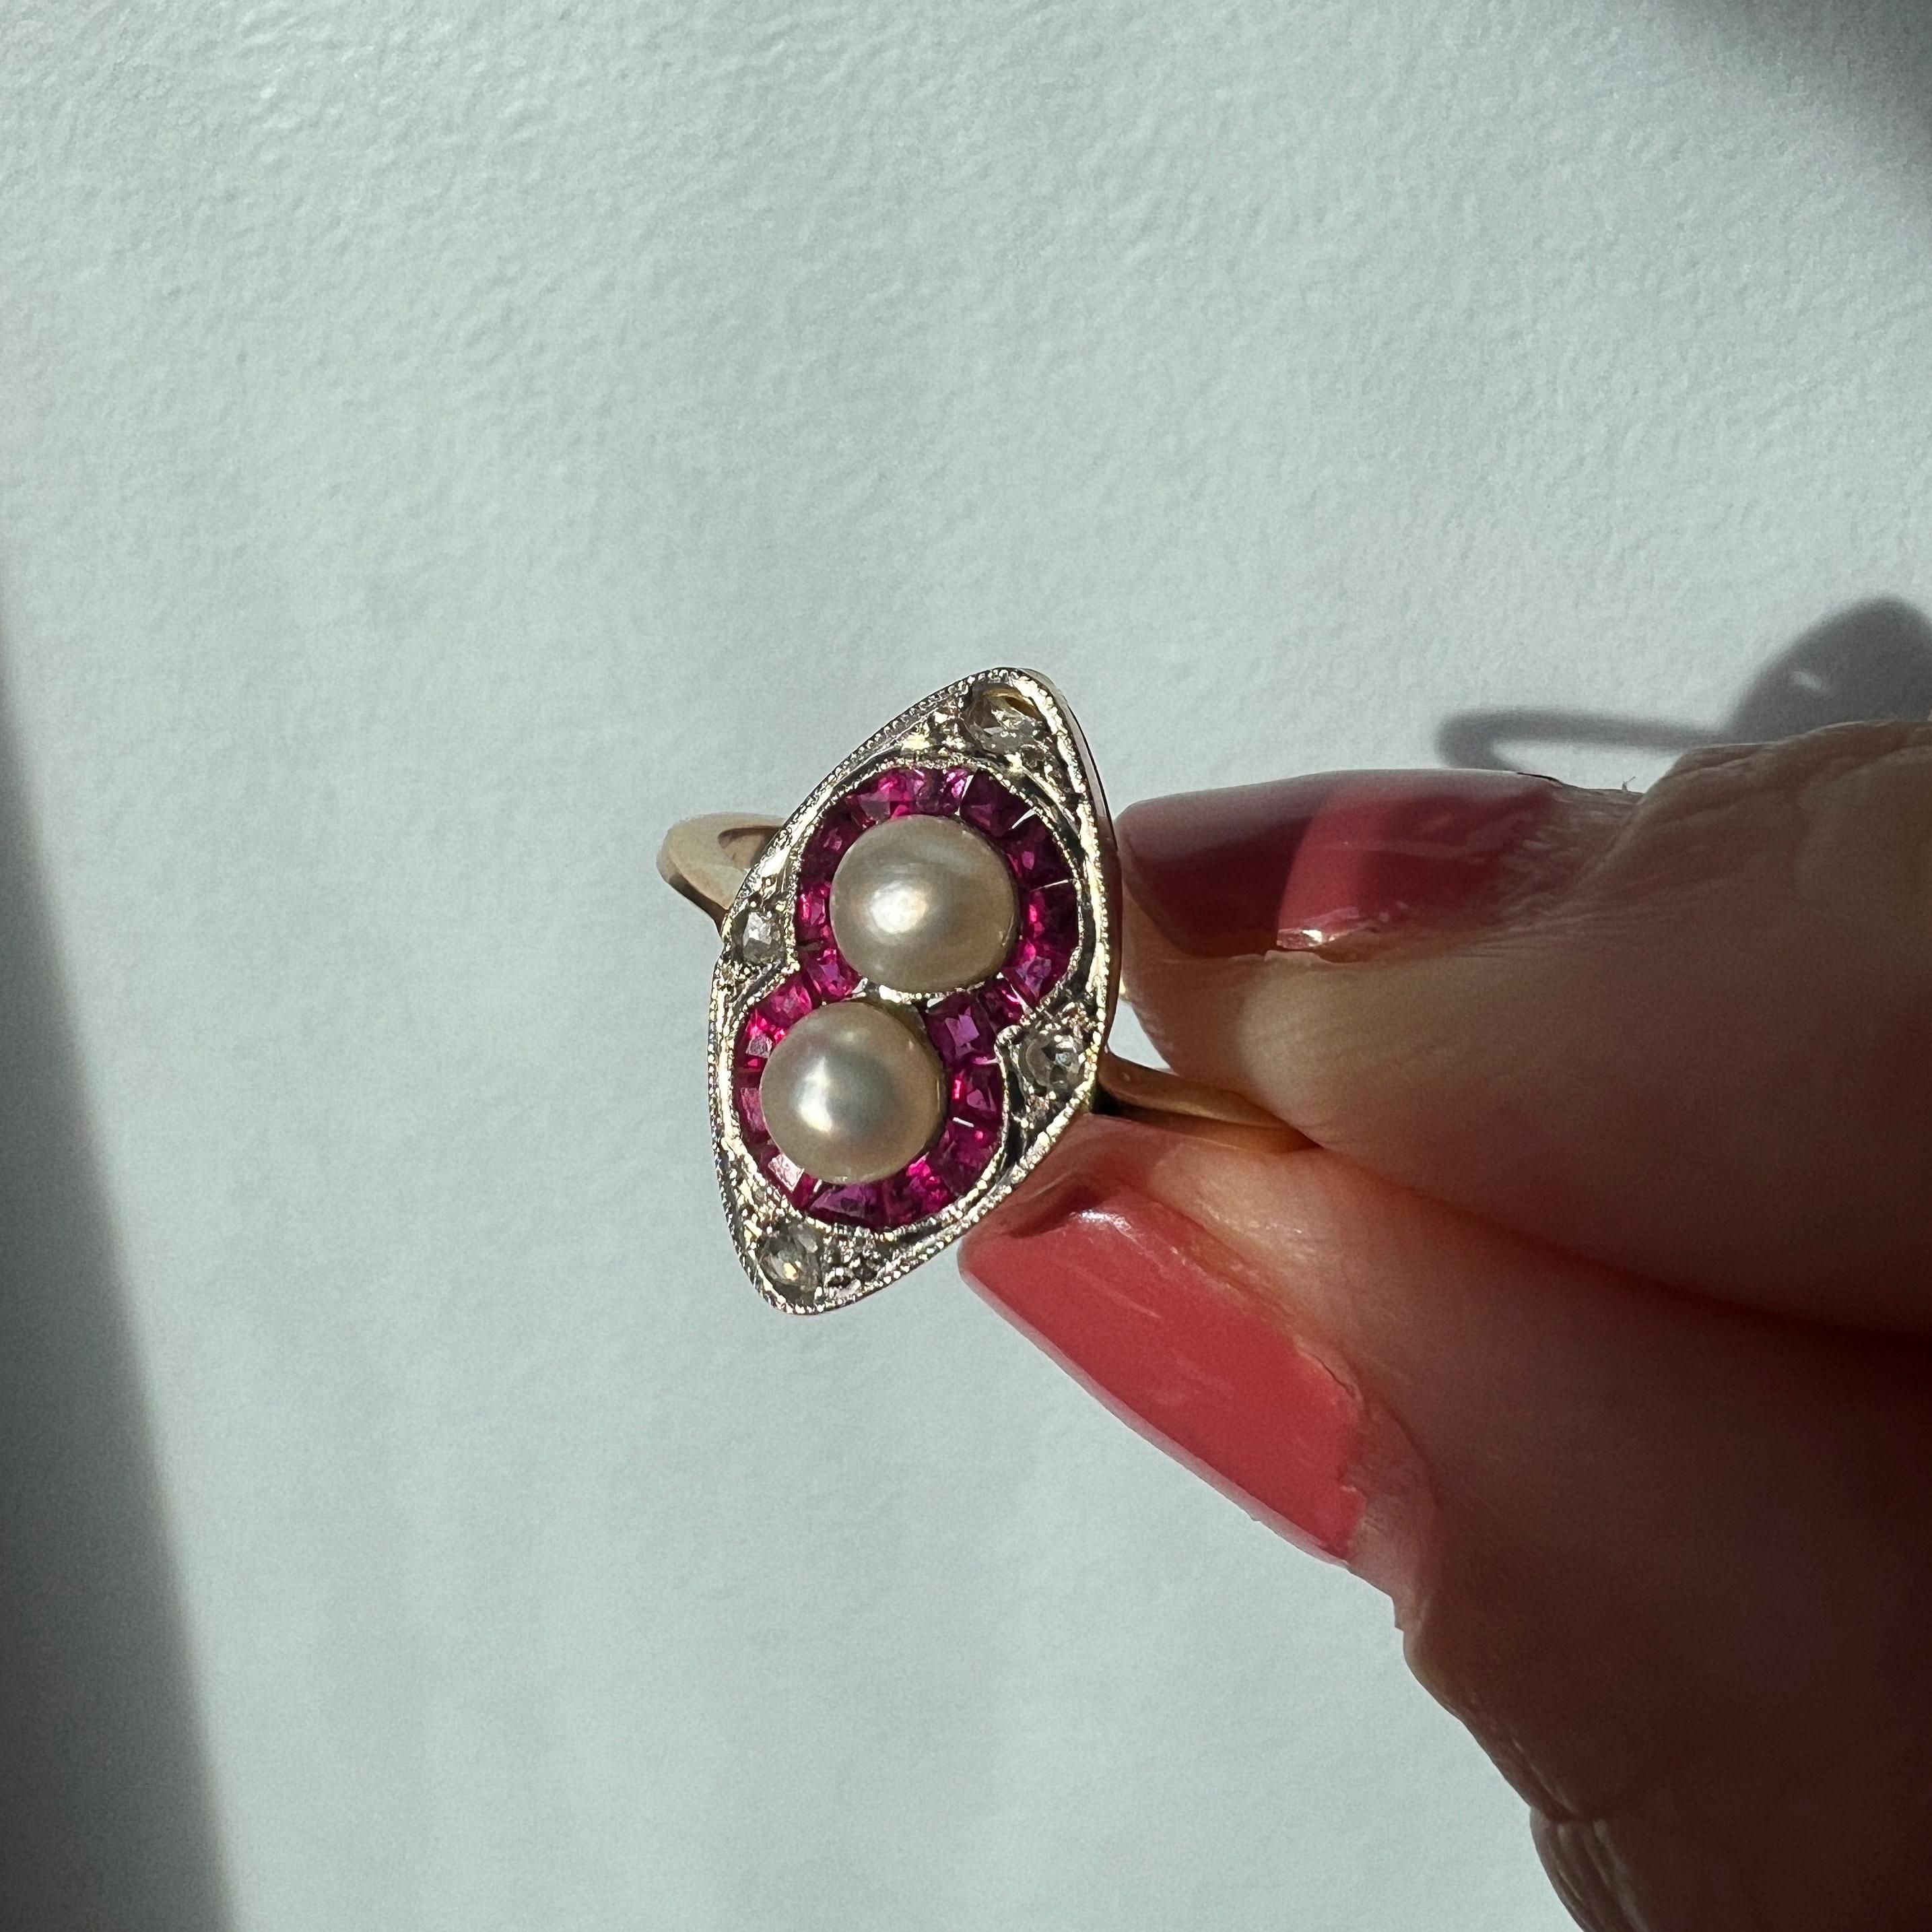 For sale a magnificence 18K gold ring from the Art Deco era. This stunning ring features a pair of lustrous white pearls, delicately nestled within a meticulously crafted setting of calibrated vivid red rubies.

The central motif, an elegantly